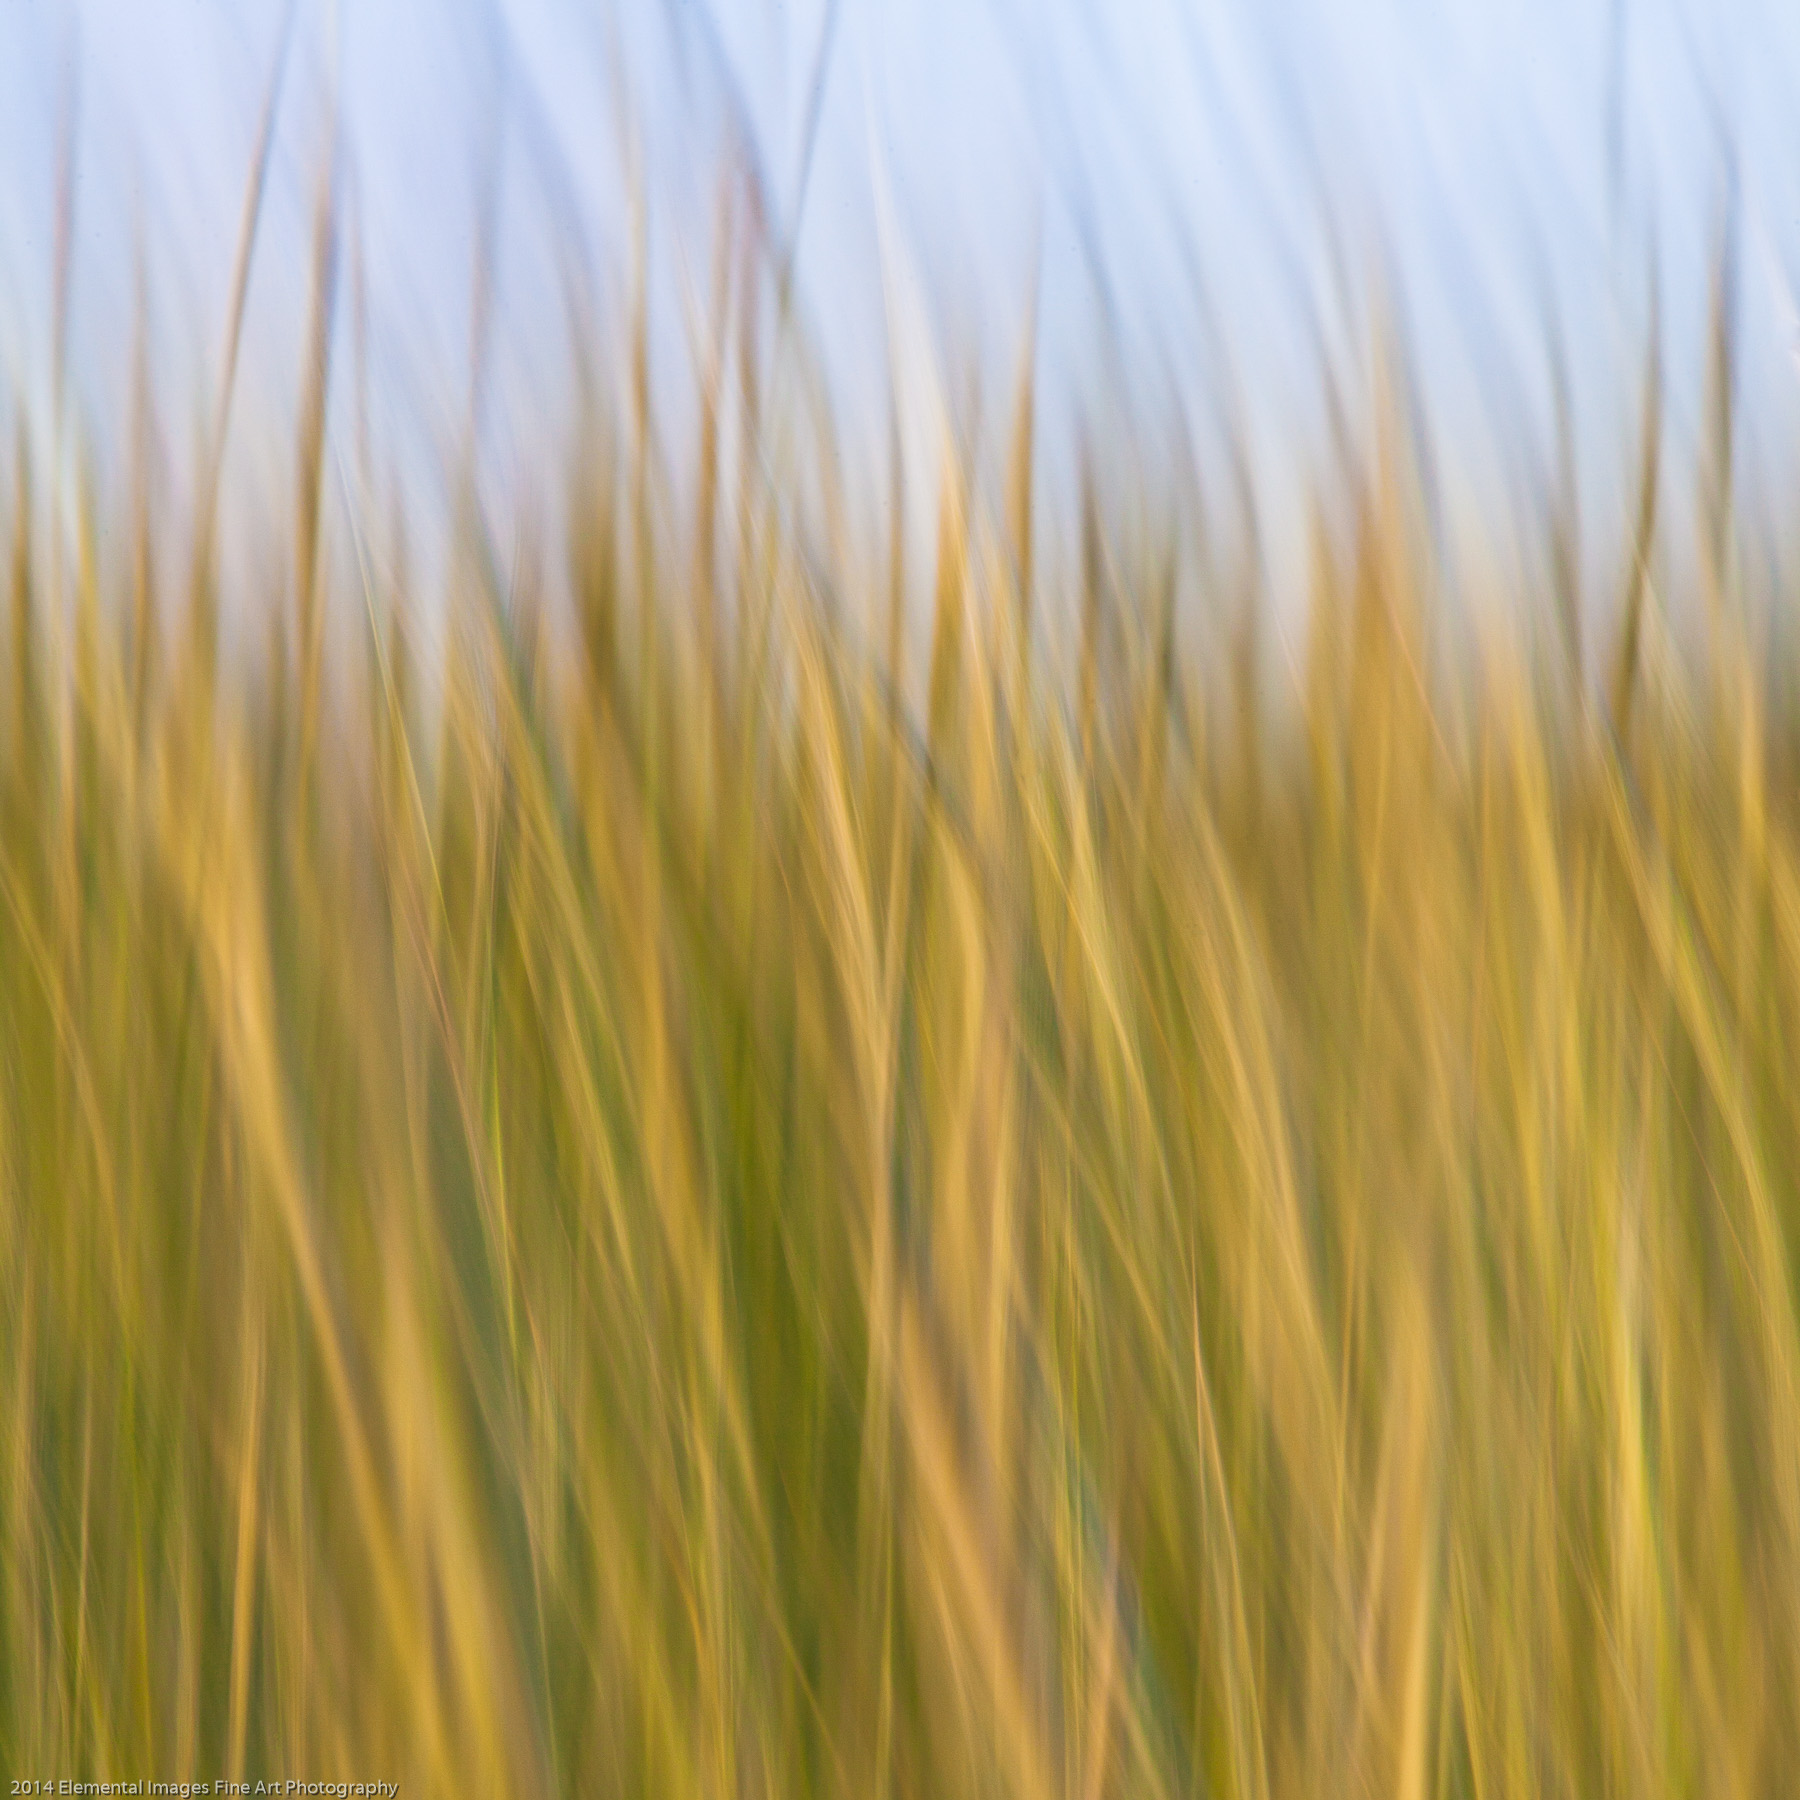 Grasses CIII | The Palouse | WA | USA - © 2014 Elemental Images Fine Art Photography - All Rights Reserved Worldwide